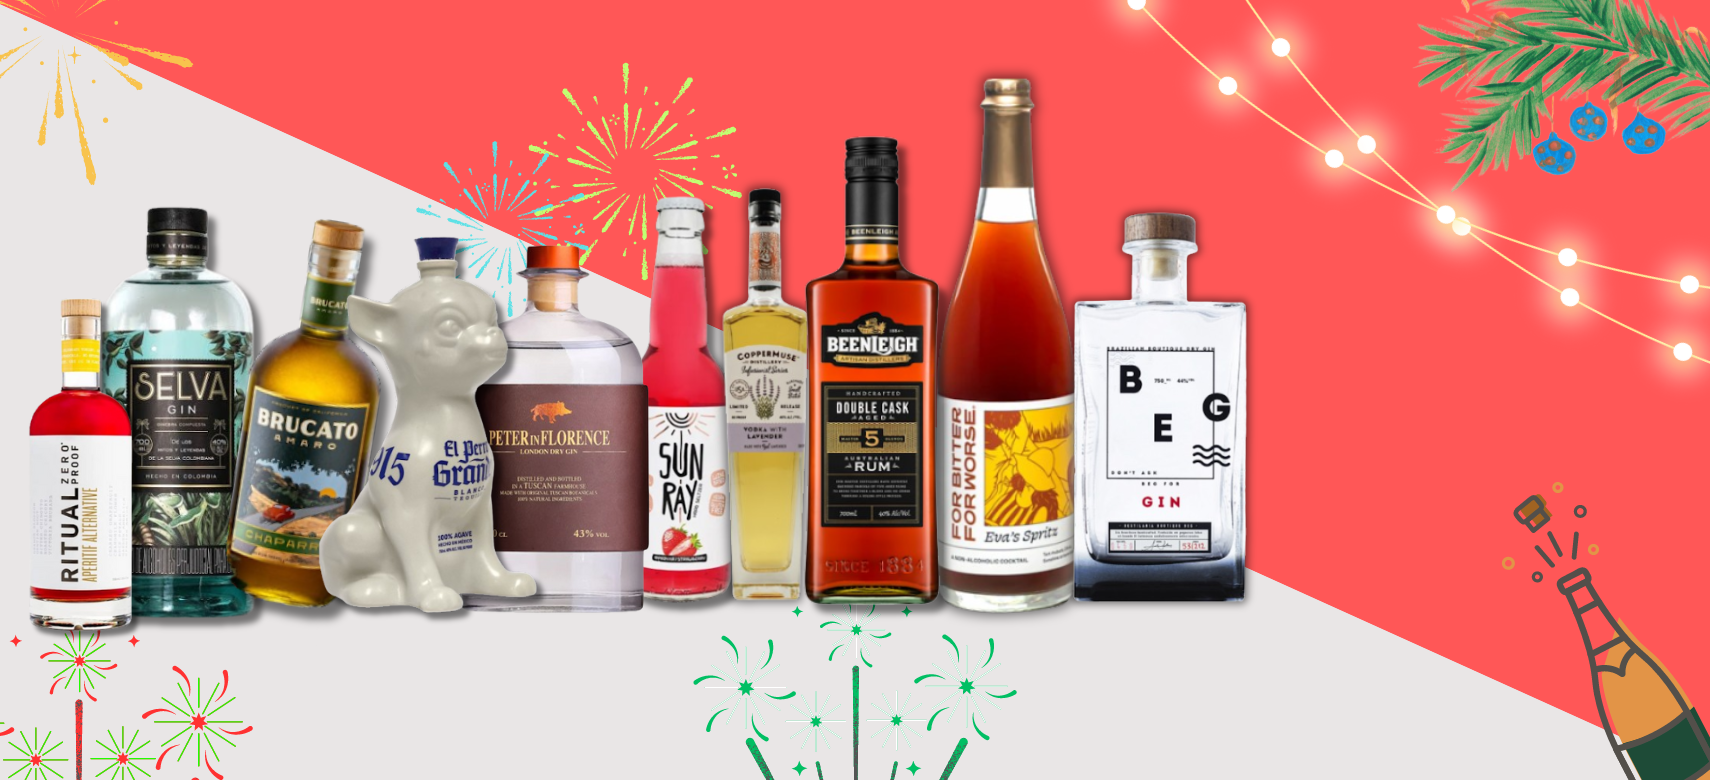 Photo for: Best 10 Spirits for New Year Eve by BSA 2023 